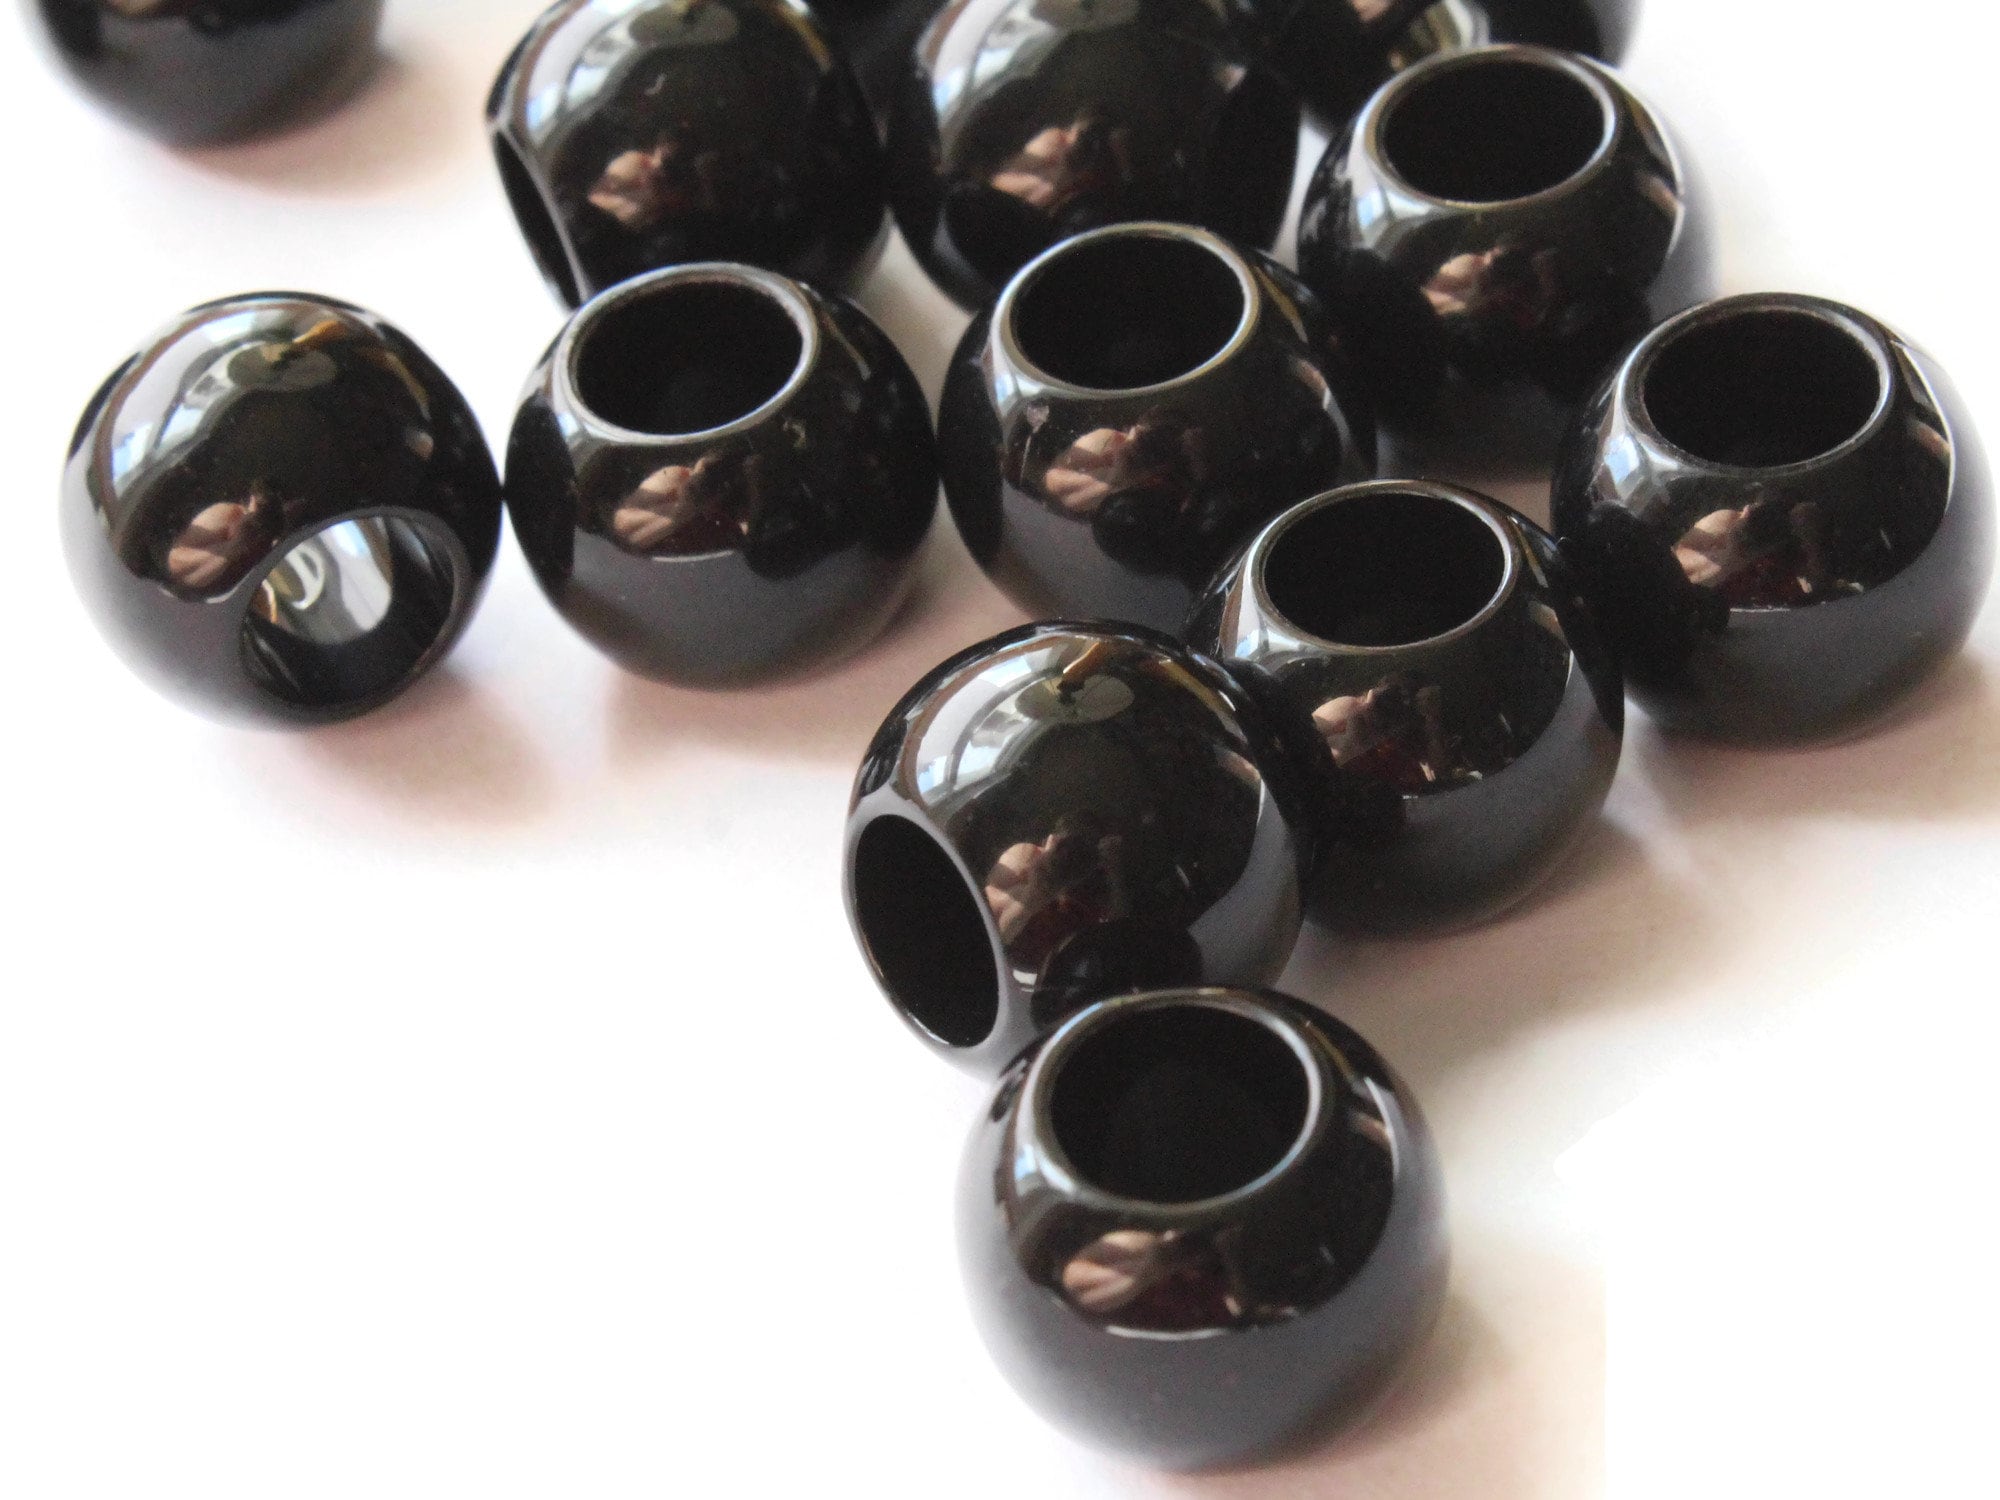 Large Hole Beads Natural Black Lava 8mm 10mm Round Beads